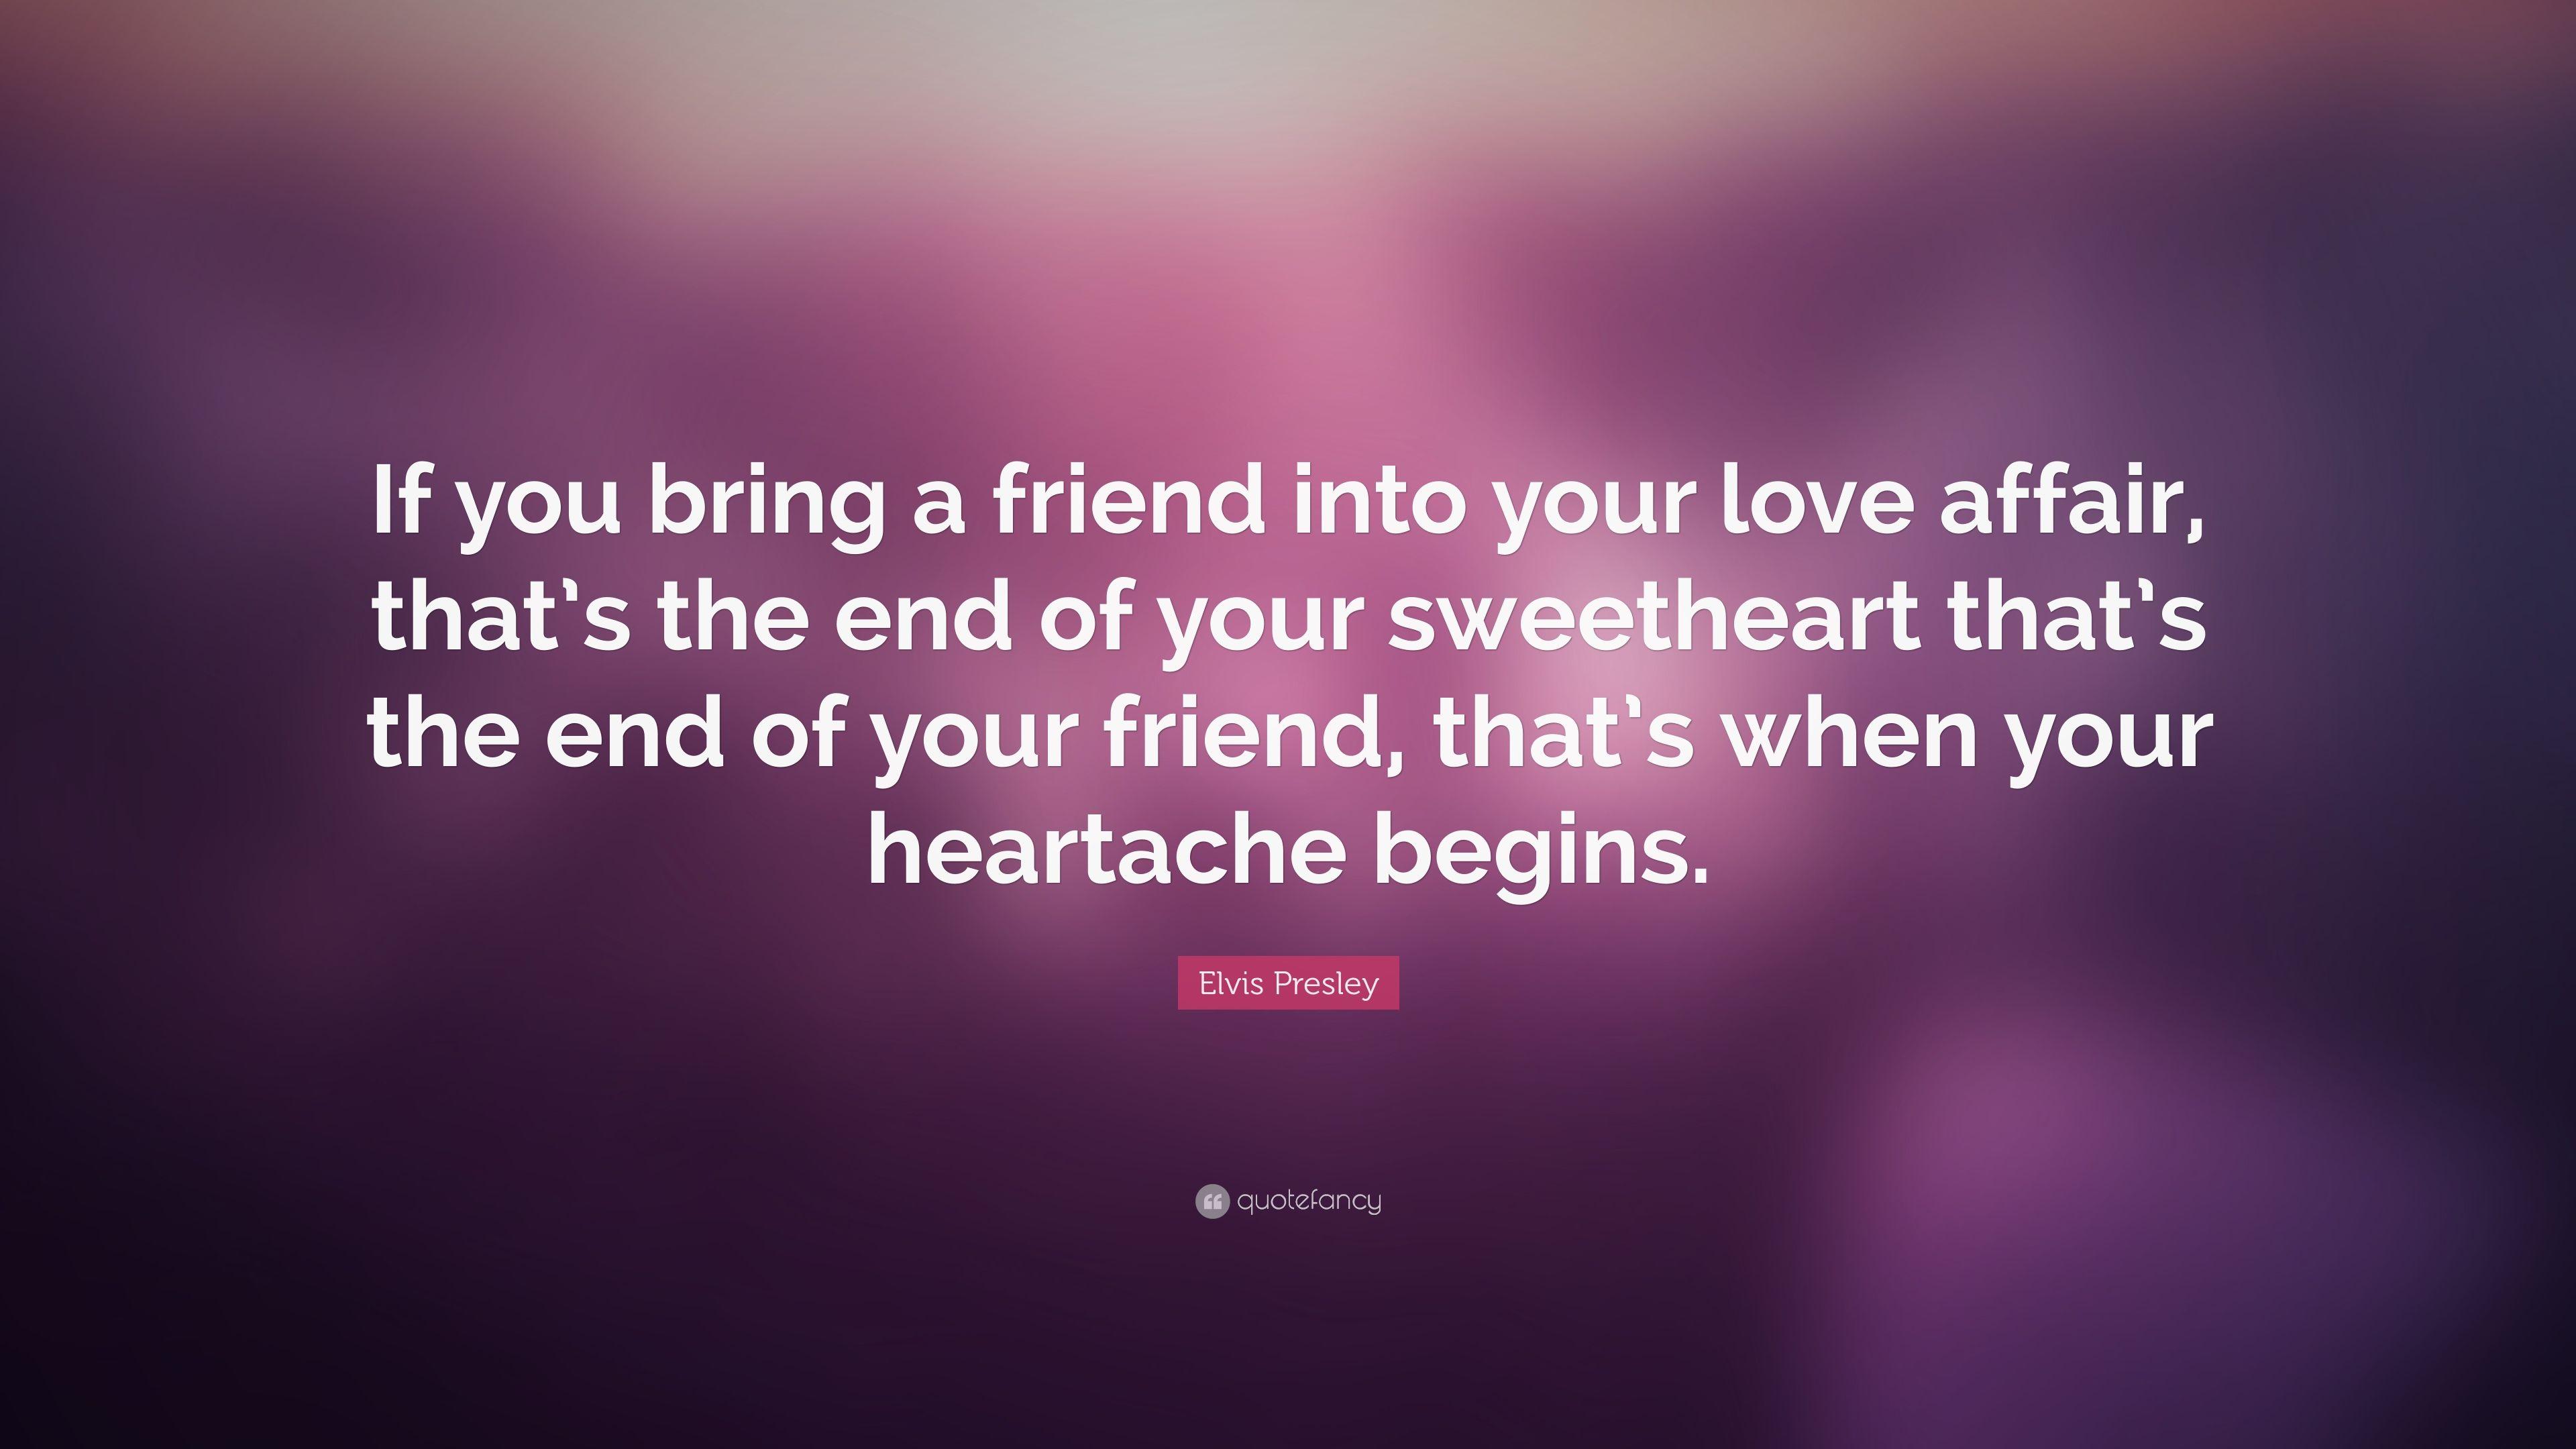 Elvis Presley Quote: “If you bring a friend into your love affair